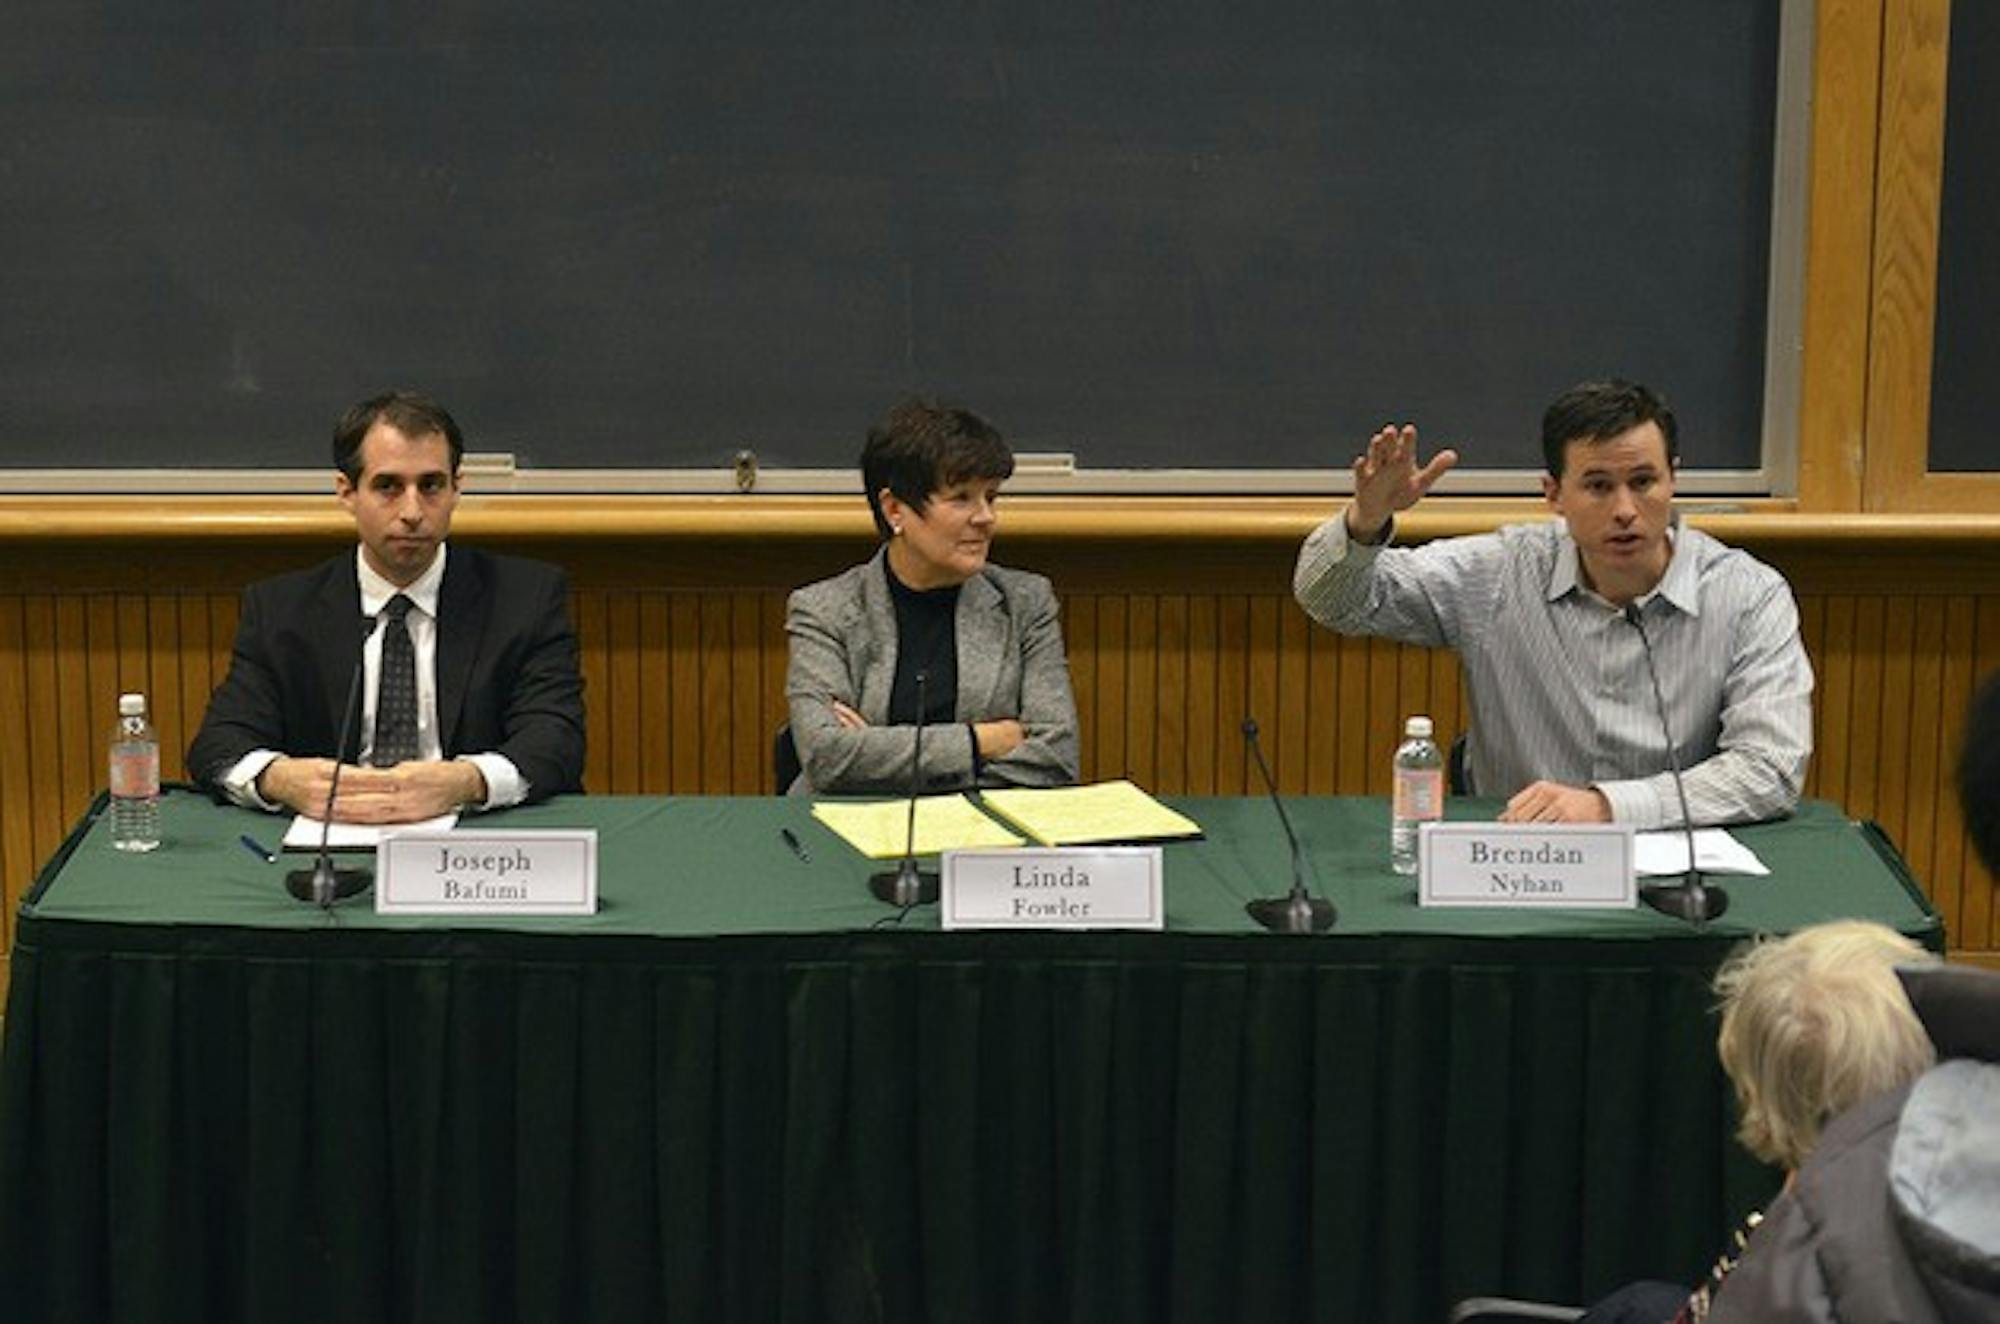 Professors Joseph Bafumi, Linda Fowler and Brendan Nyhan discussed the fiscal crisis and political polarization as issues dominating the post-election landscape.